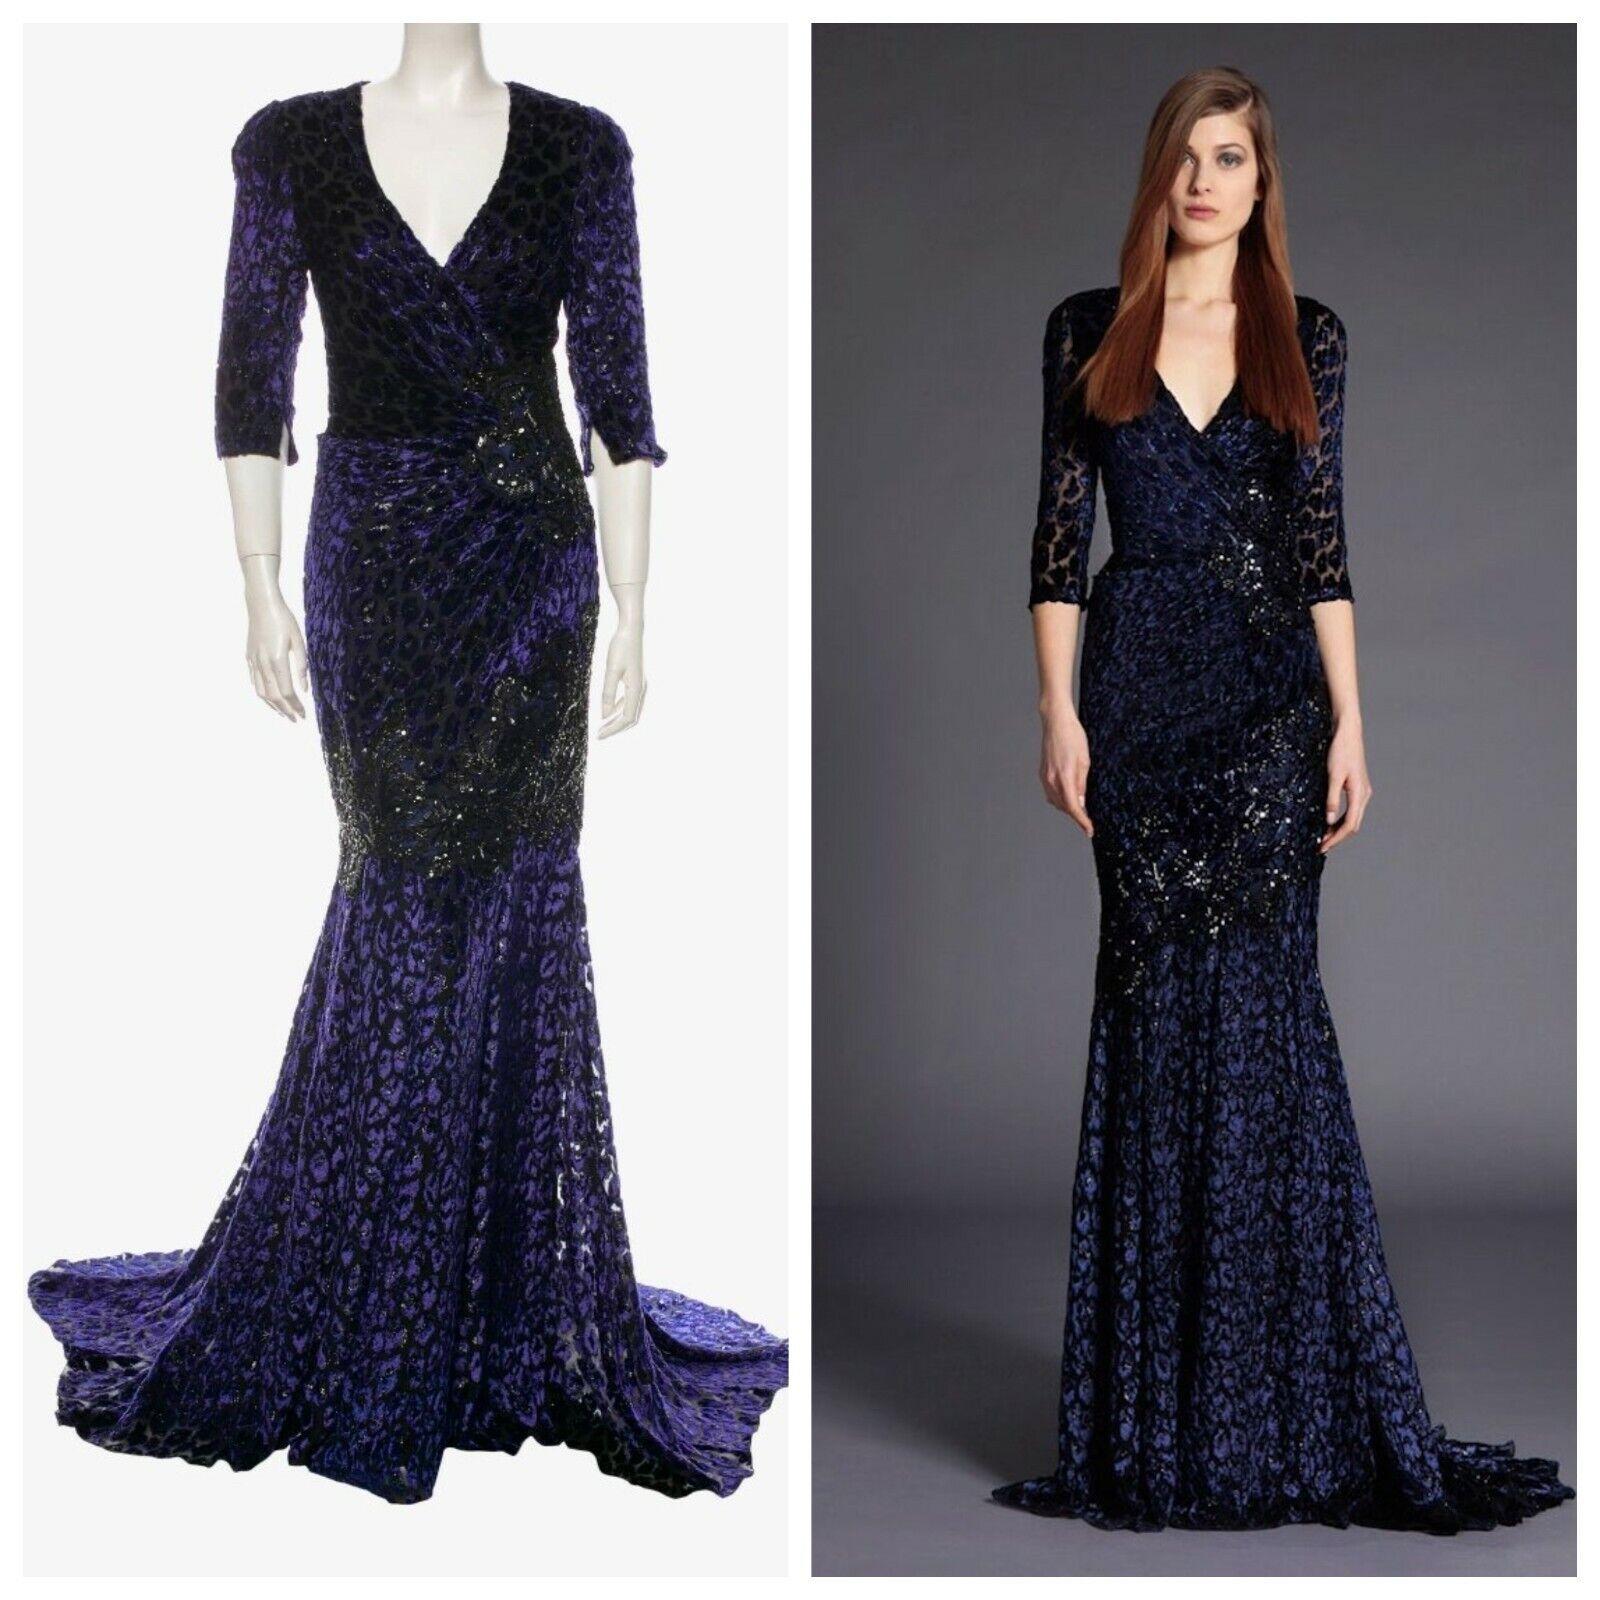 Andrew Gn Leopard Print Devore Velvet Maxi Dress
French size 38 - US 6
Finished with beaded embroidery, 3/4 sleeve.
Made in France.
Excellent condition.